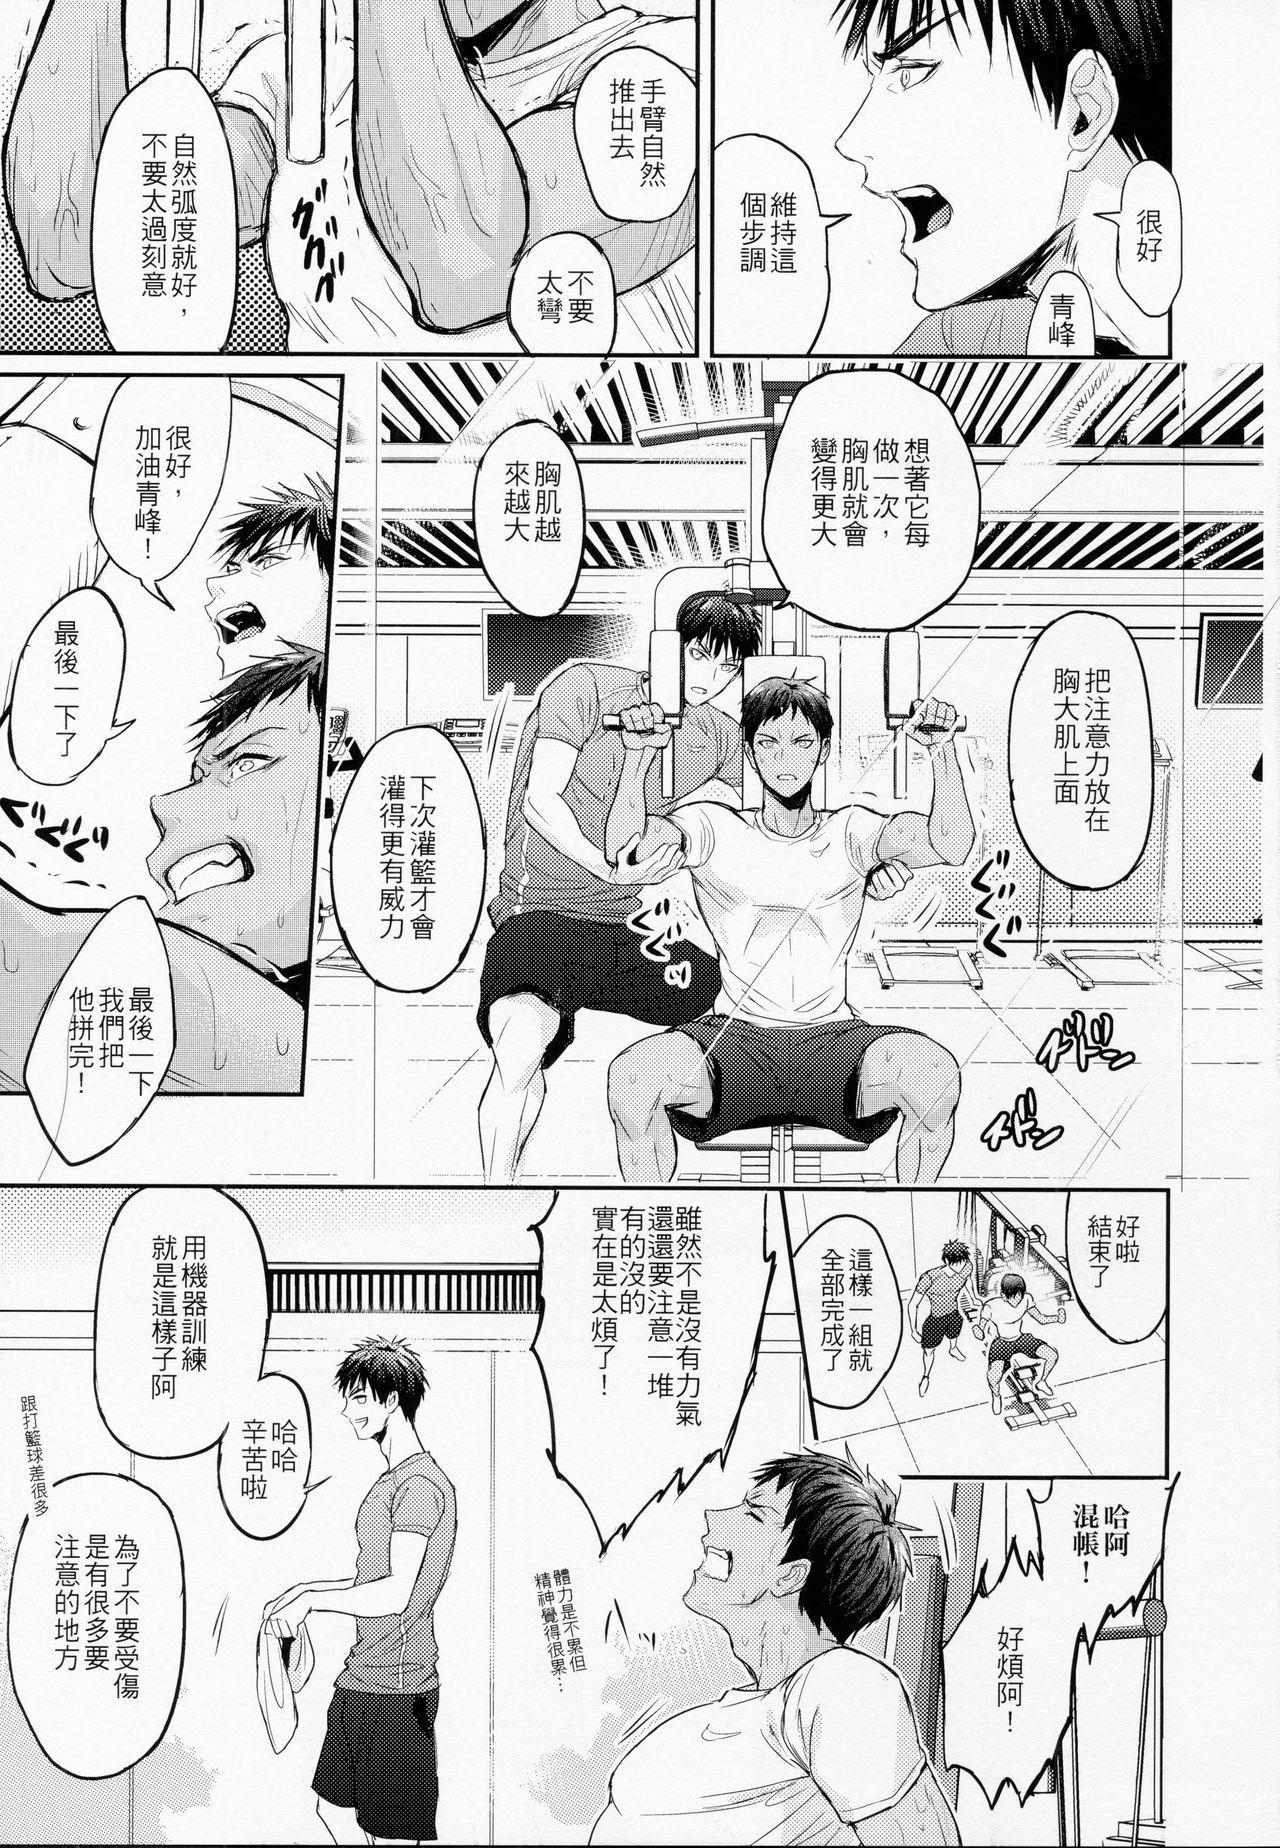 Rebolando This is how we WORK IT OUT - Kuroko no basuke Funny - Page 4